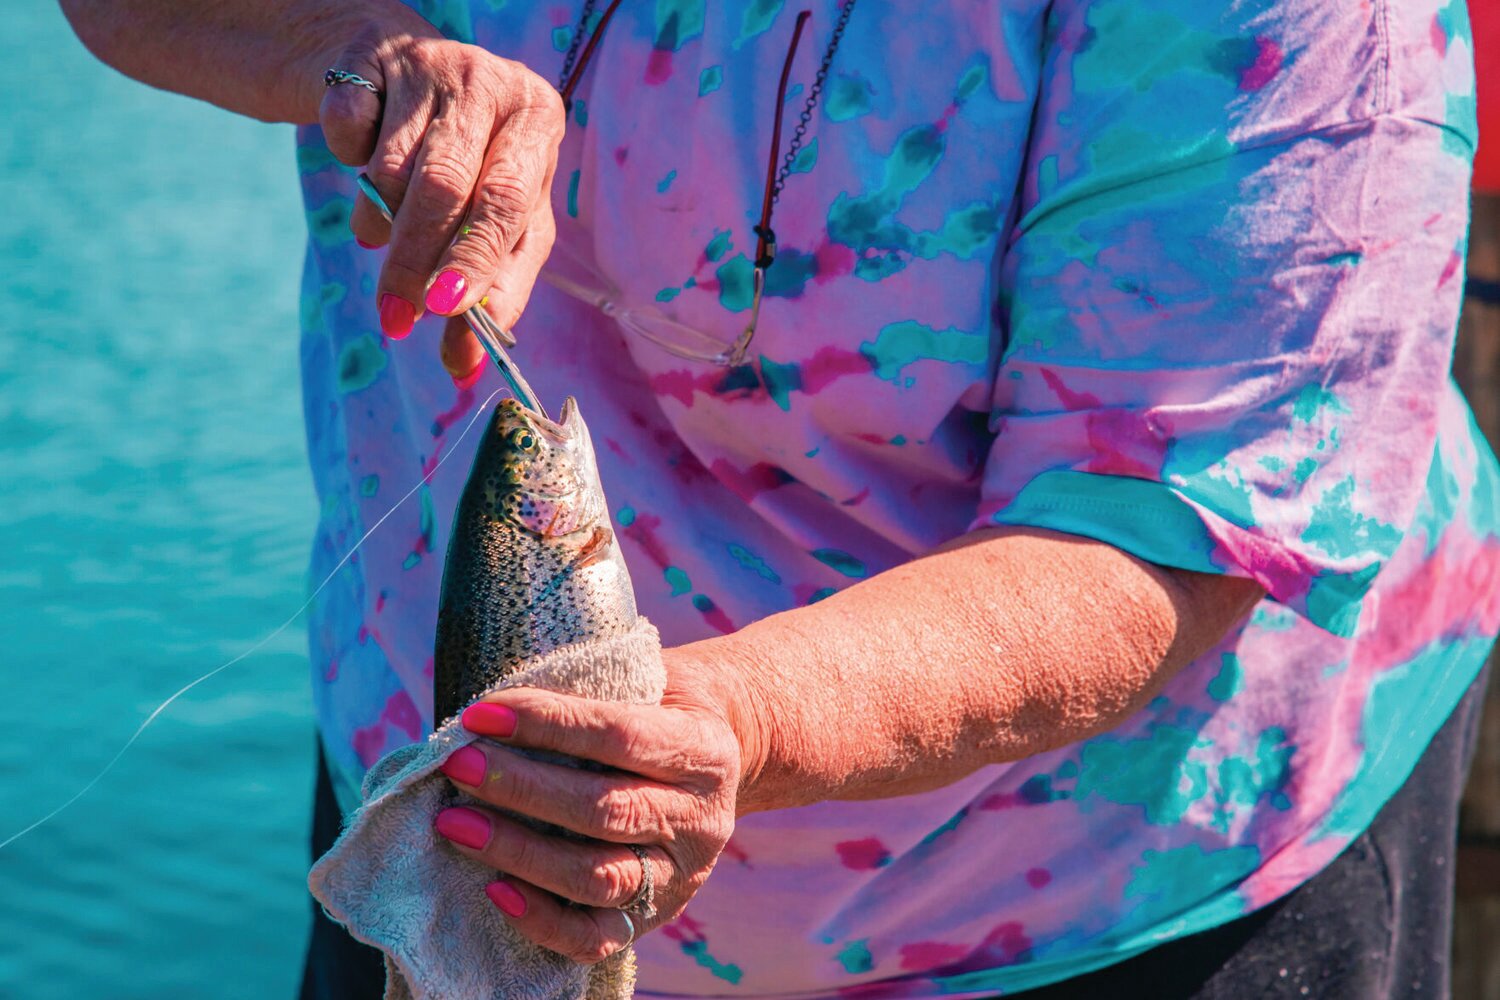 Terry Todd, of Sumner, holds a rainbow trout as she works to remove a hook while fishing at Deep Lake at Millersylvania State Park in this file photo.